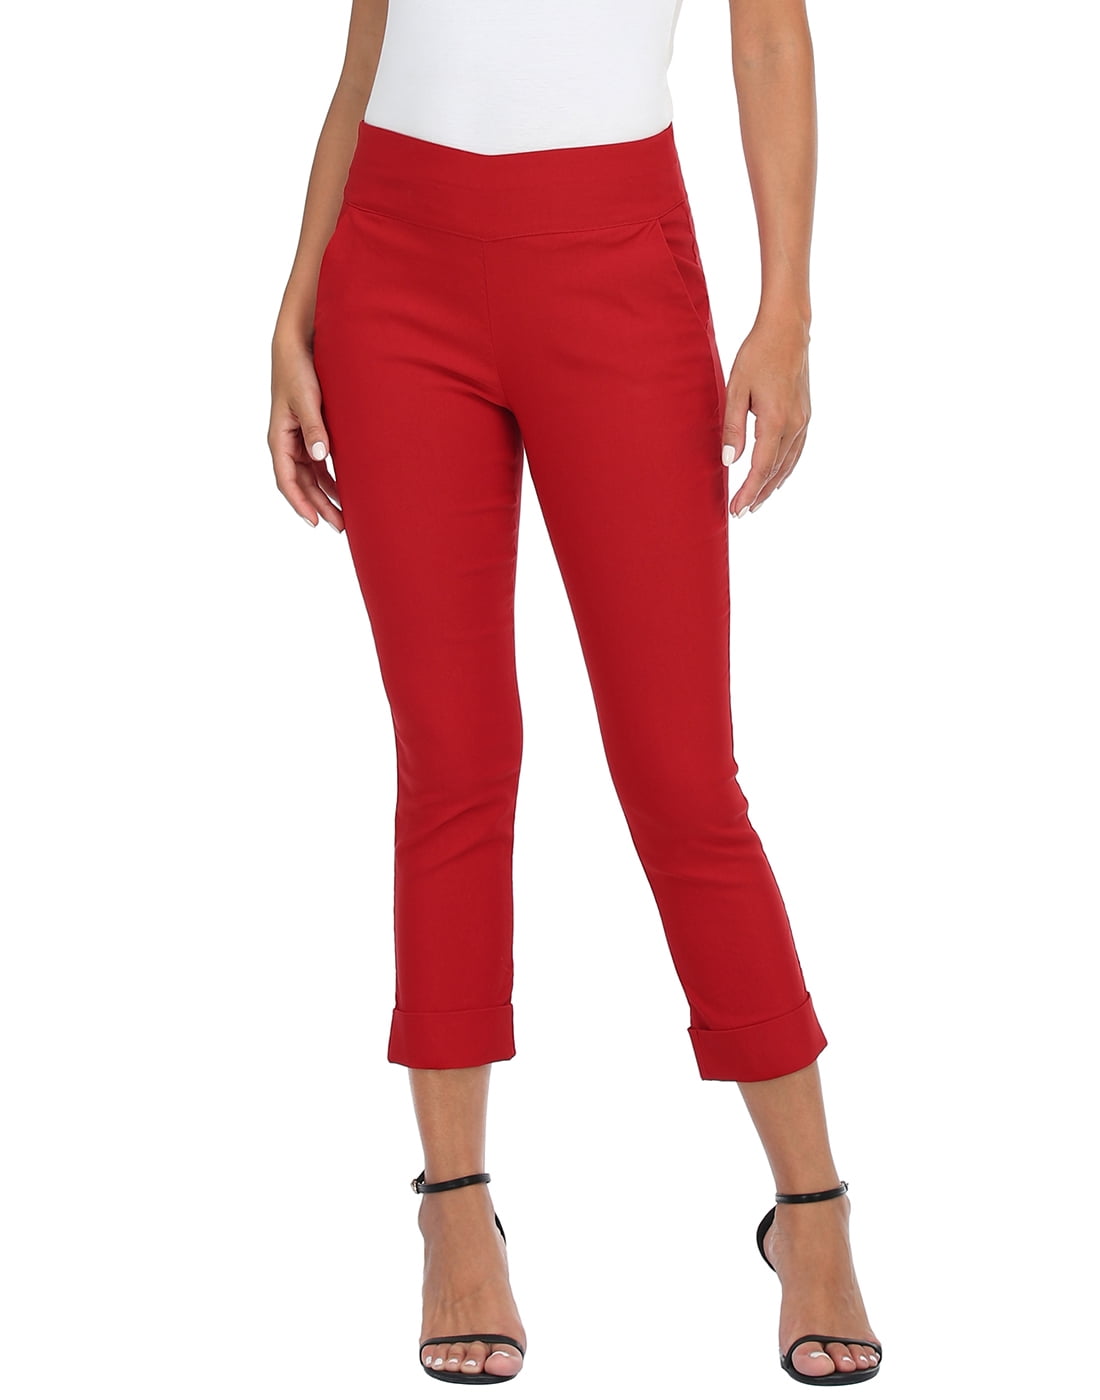 HDE Pull On Capri Pants For Women with Pockets Elastic Waist Cropped Pants  Red XXL 